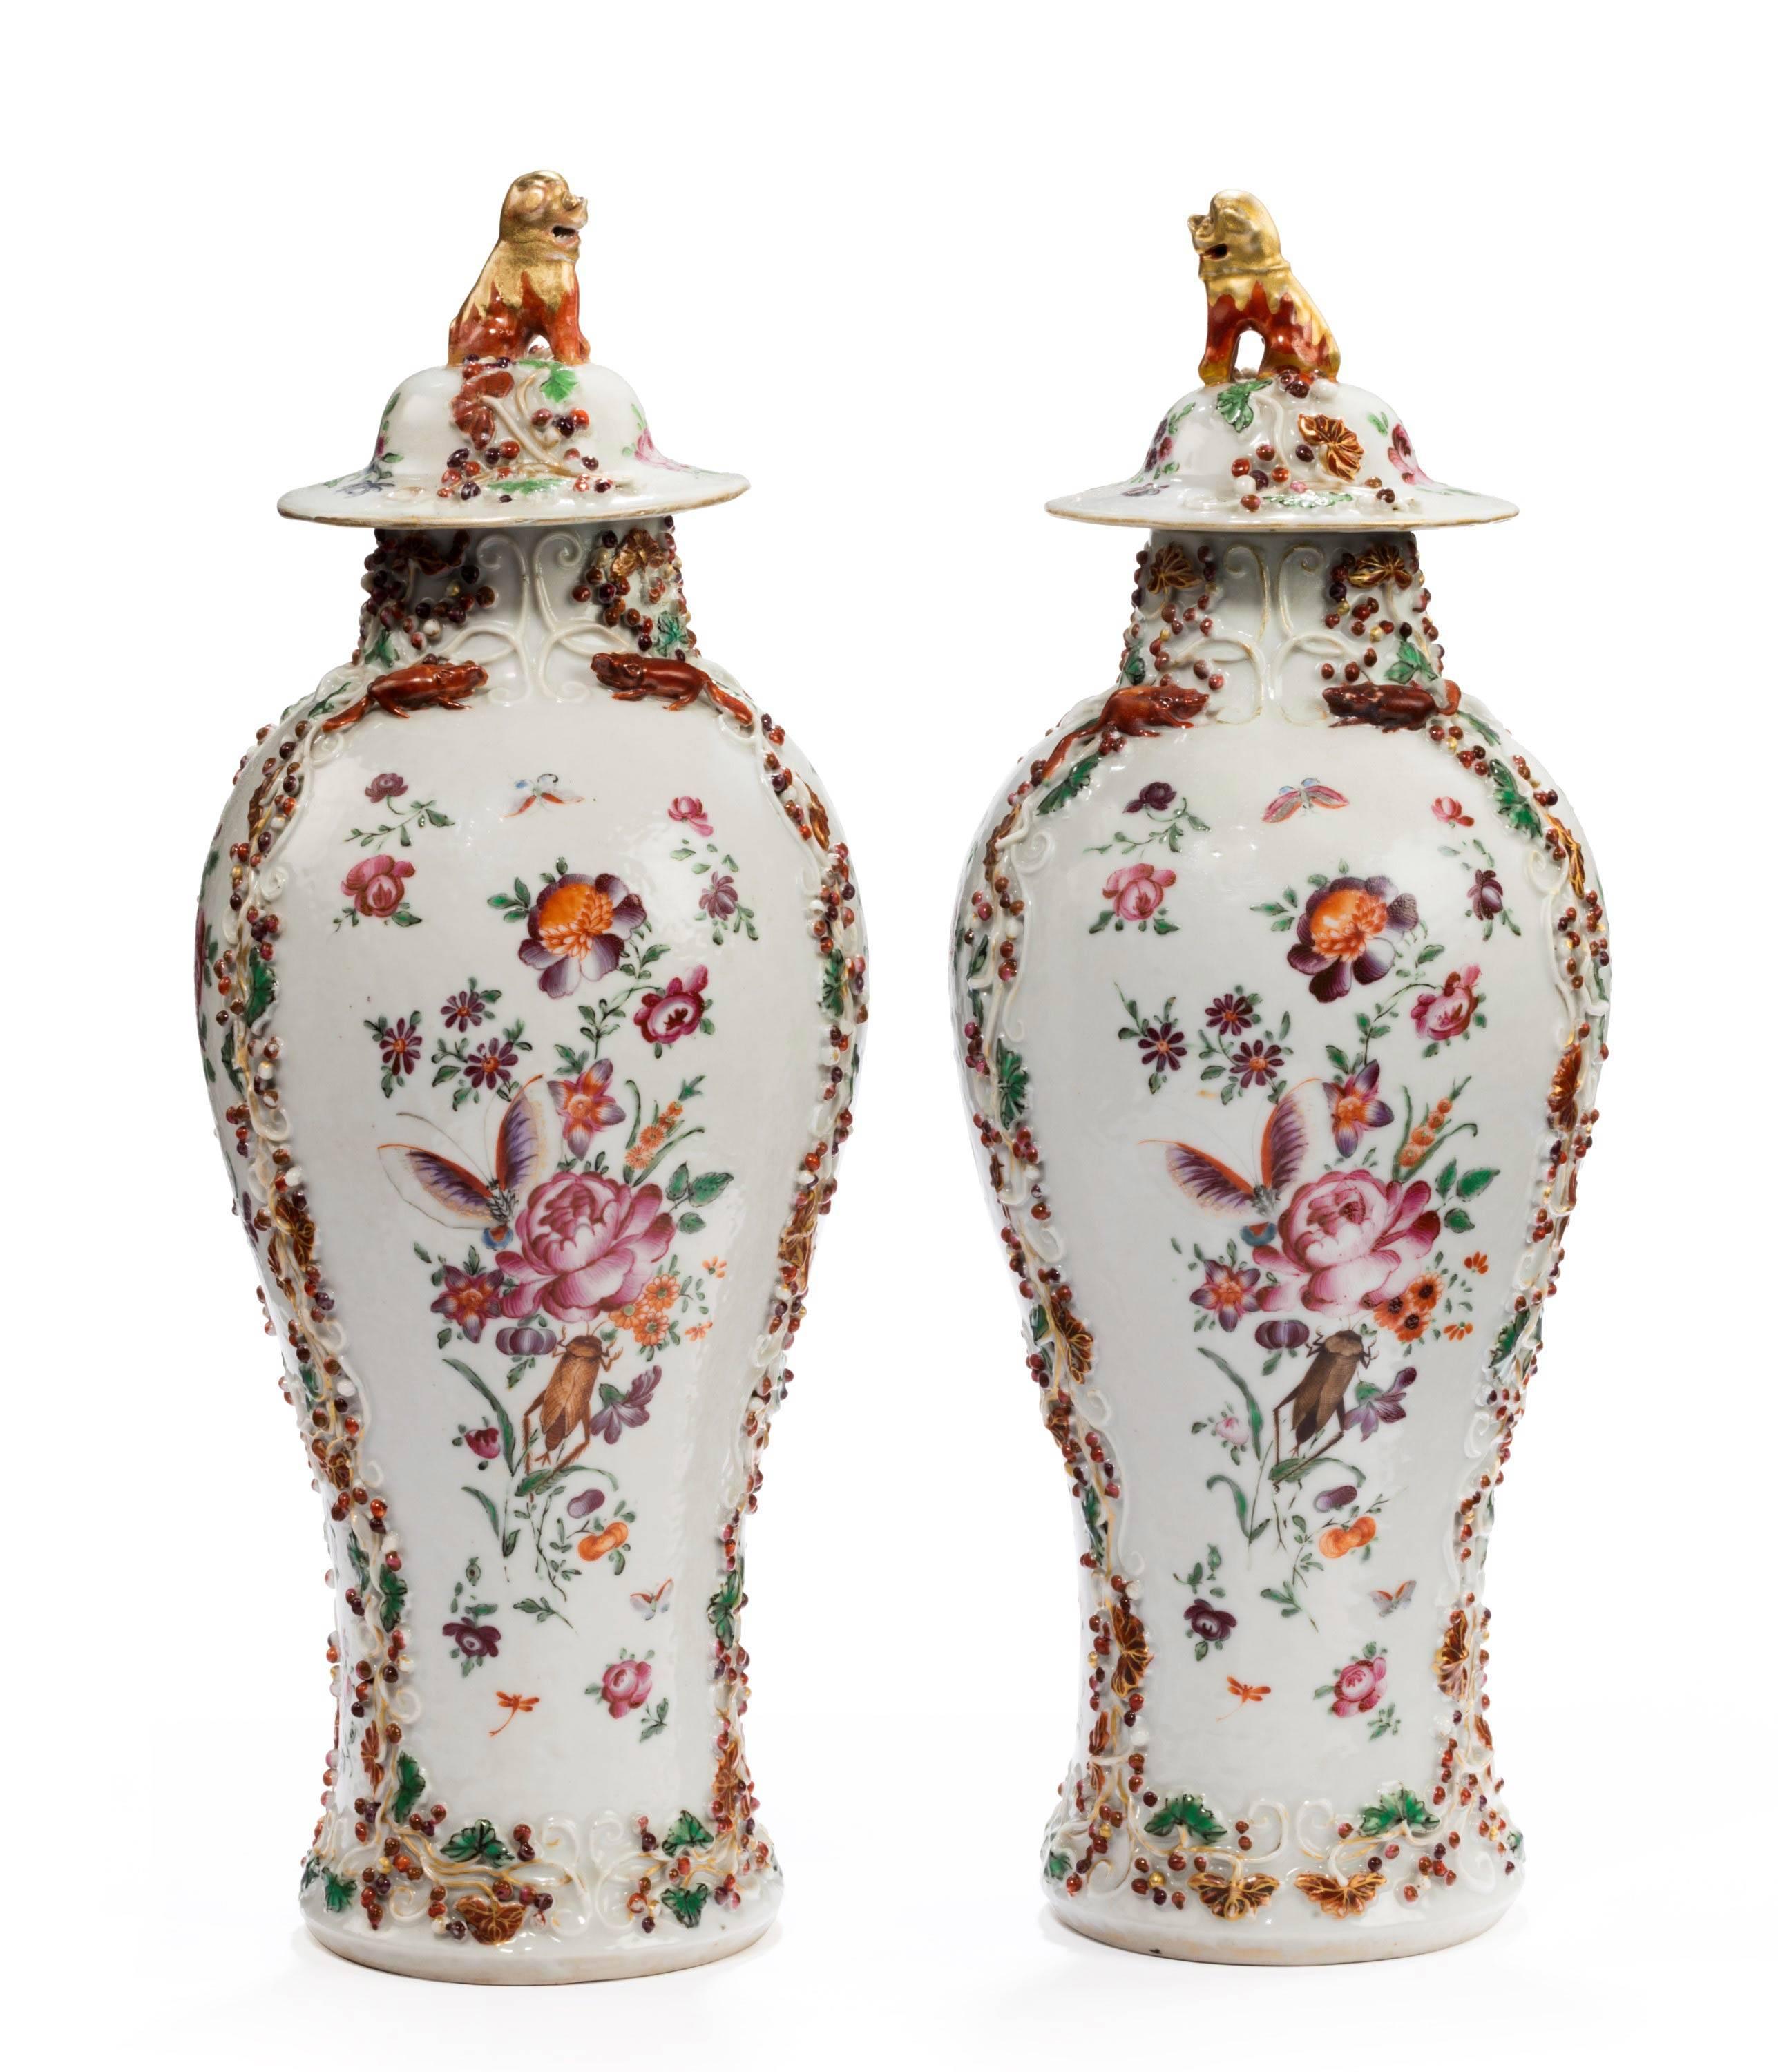 Pair of Late 19th Century Oriental Porcelain Baluster Shaped Vases In Excellent Condition For Sale In Peterborough, Northamptonshire